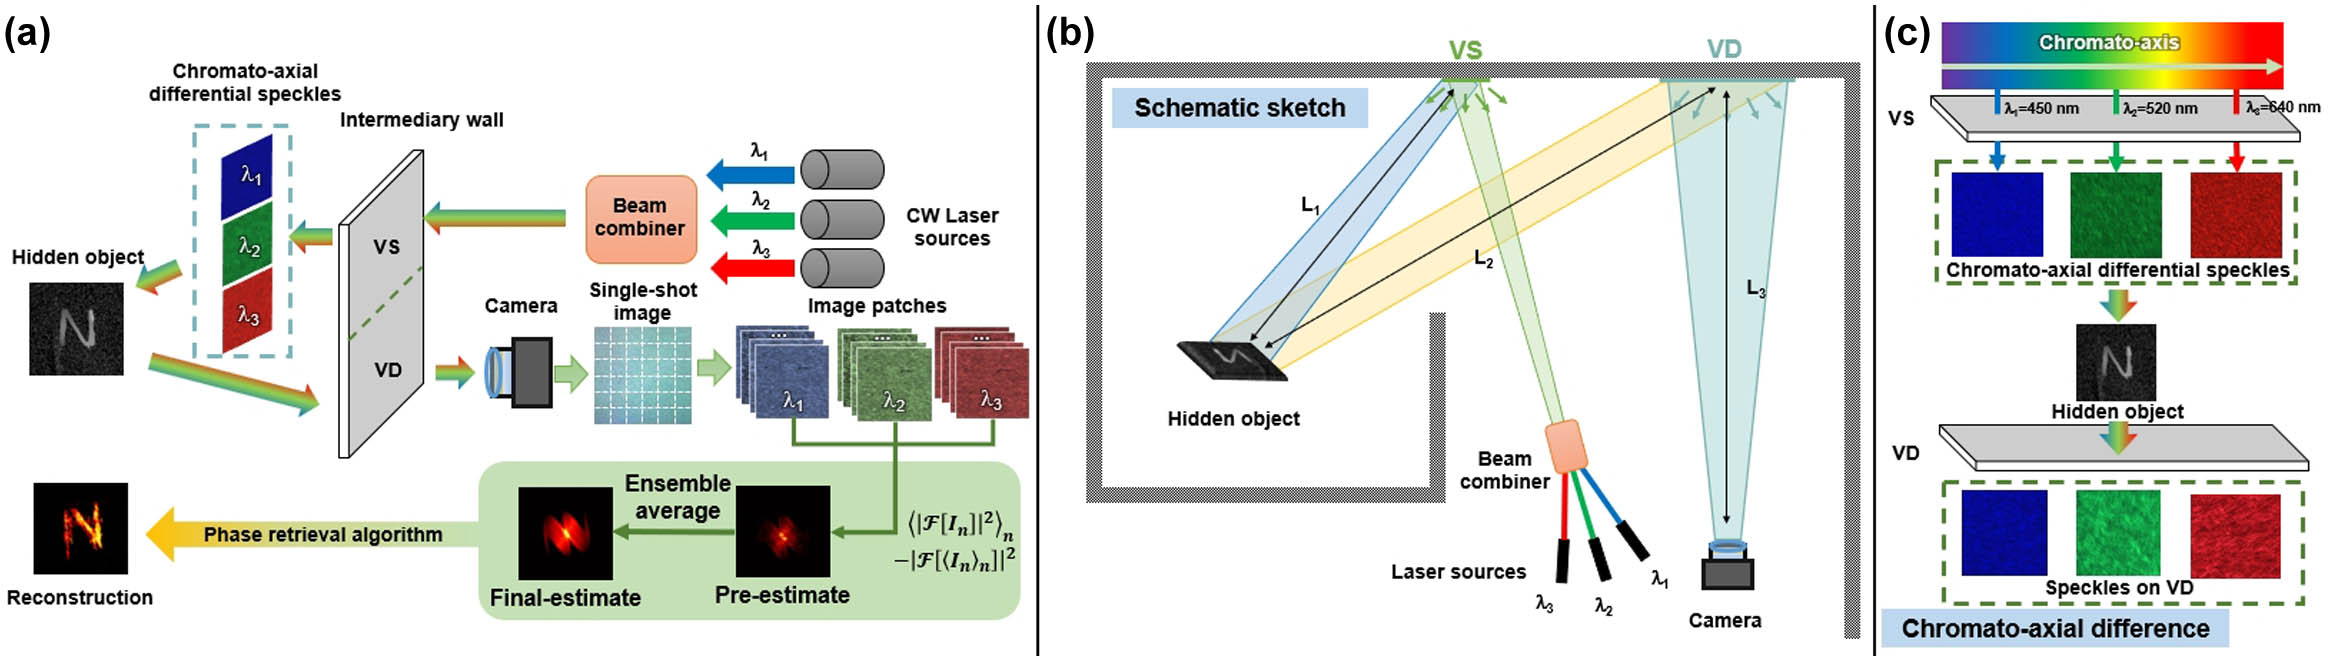 Single-shot NLOS imaging based on chromato-axial differential correlography. (a) Principle diagram of the method. (b) Schematic sketch of the system. (c) Chromato-axial difference: the correlation coefficients between the laser speckles of 450 nm and 520 nm, 450 nm and 640 nm, 520 nm and 640 nm are 0.0095, 0.0039, and 0.0014. The uncorrelated laser speckles encode the hidden object.